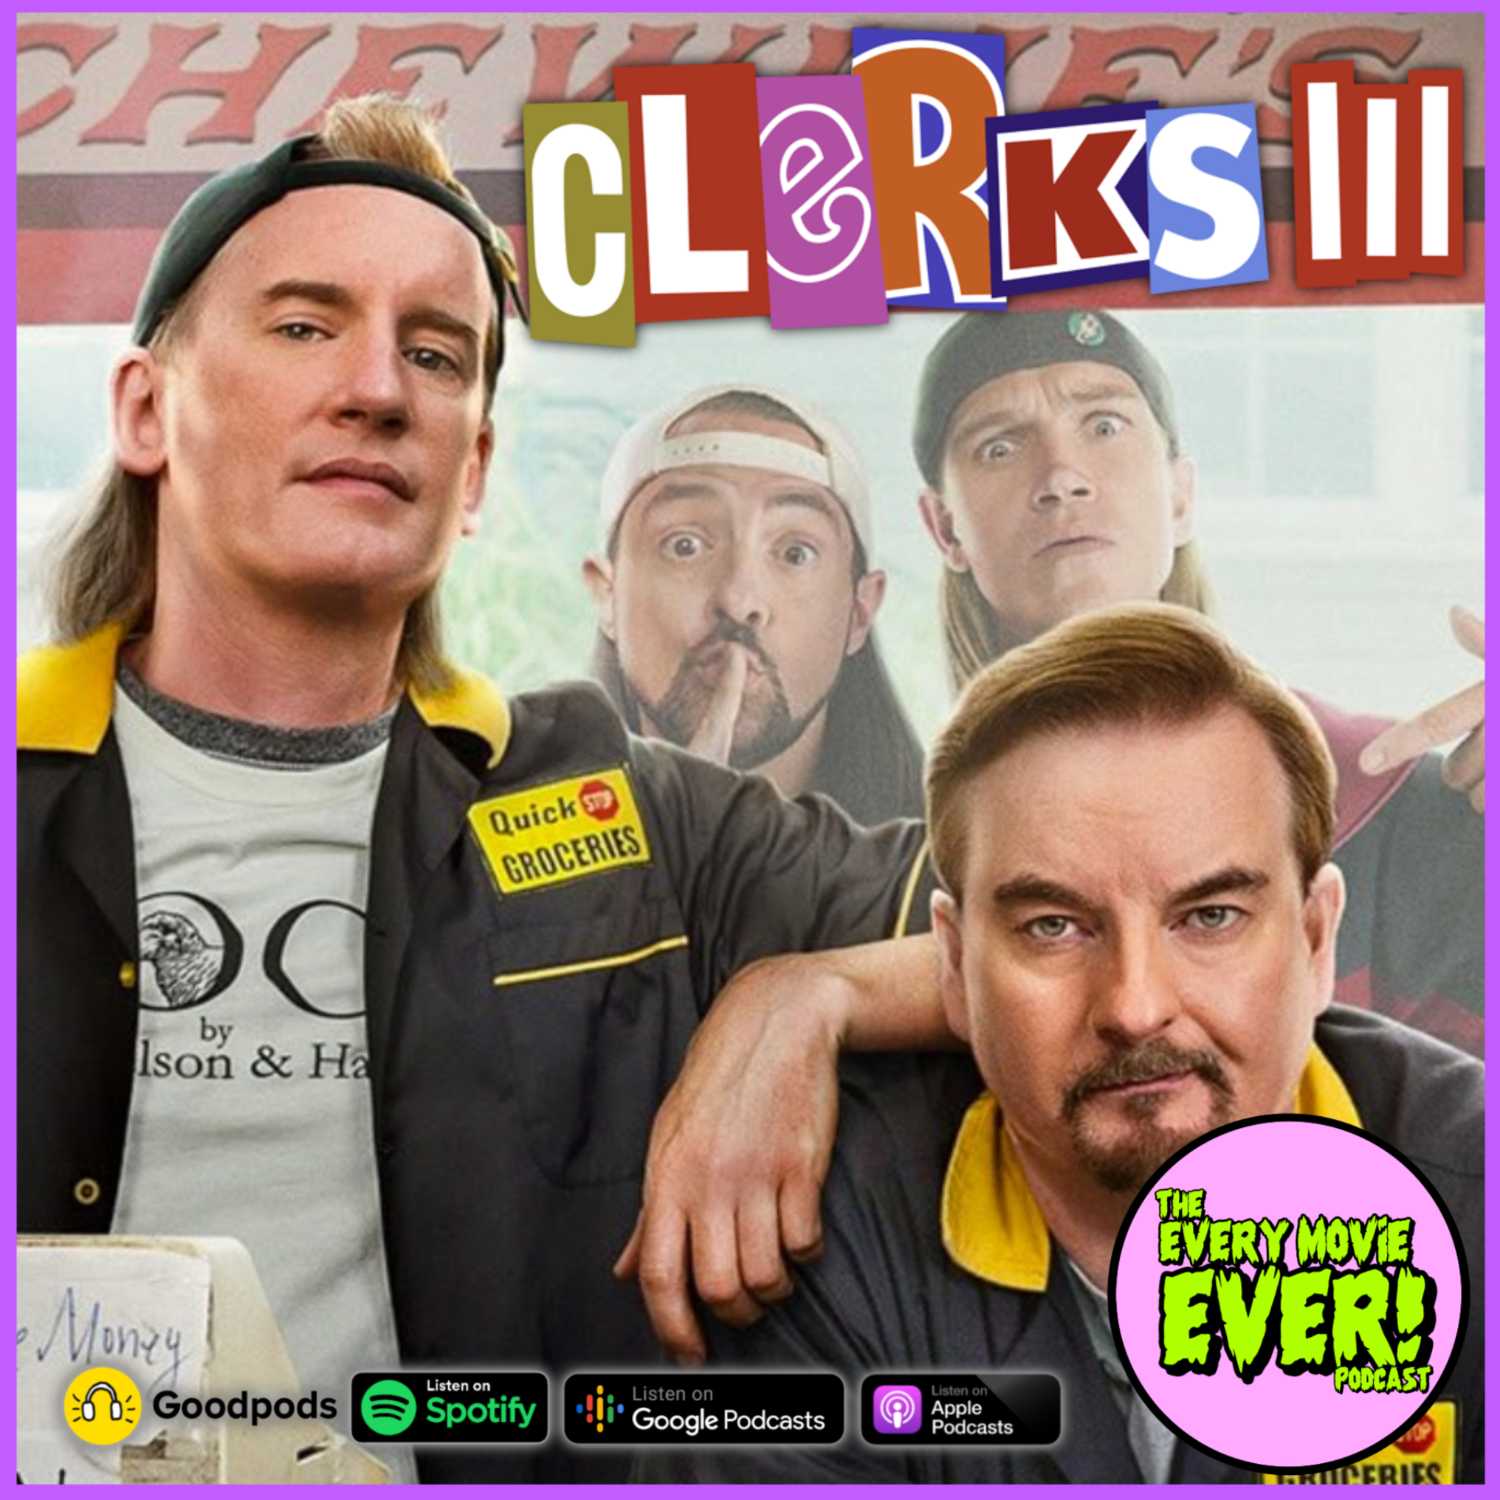 Clerks III: Trusting The Director - View Askewniverse